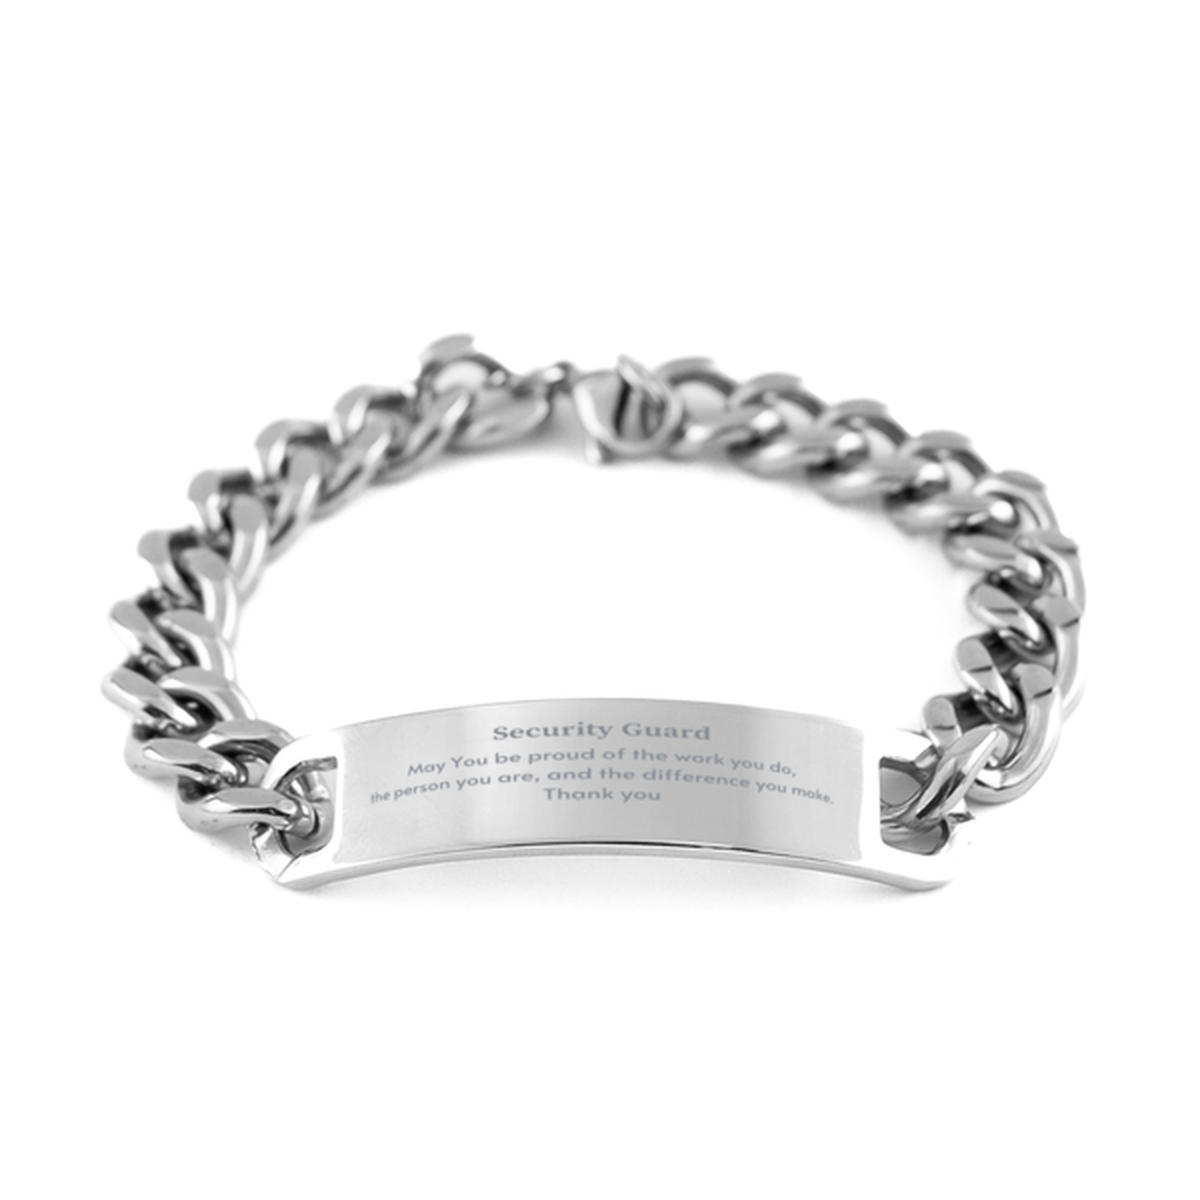 Heartwarming Cuban Chain Stainless Steel Bracelet Retirement Coworkers Gifts for Security Guard, Security Guard May You be proud of the work you do, the person you are Gifts for Boss Men Women Friends